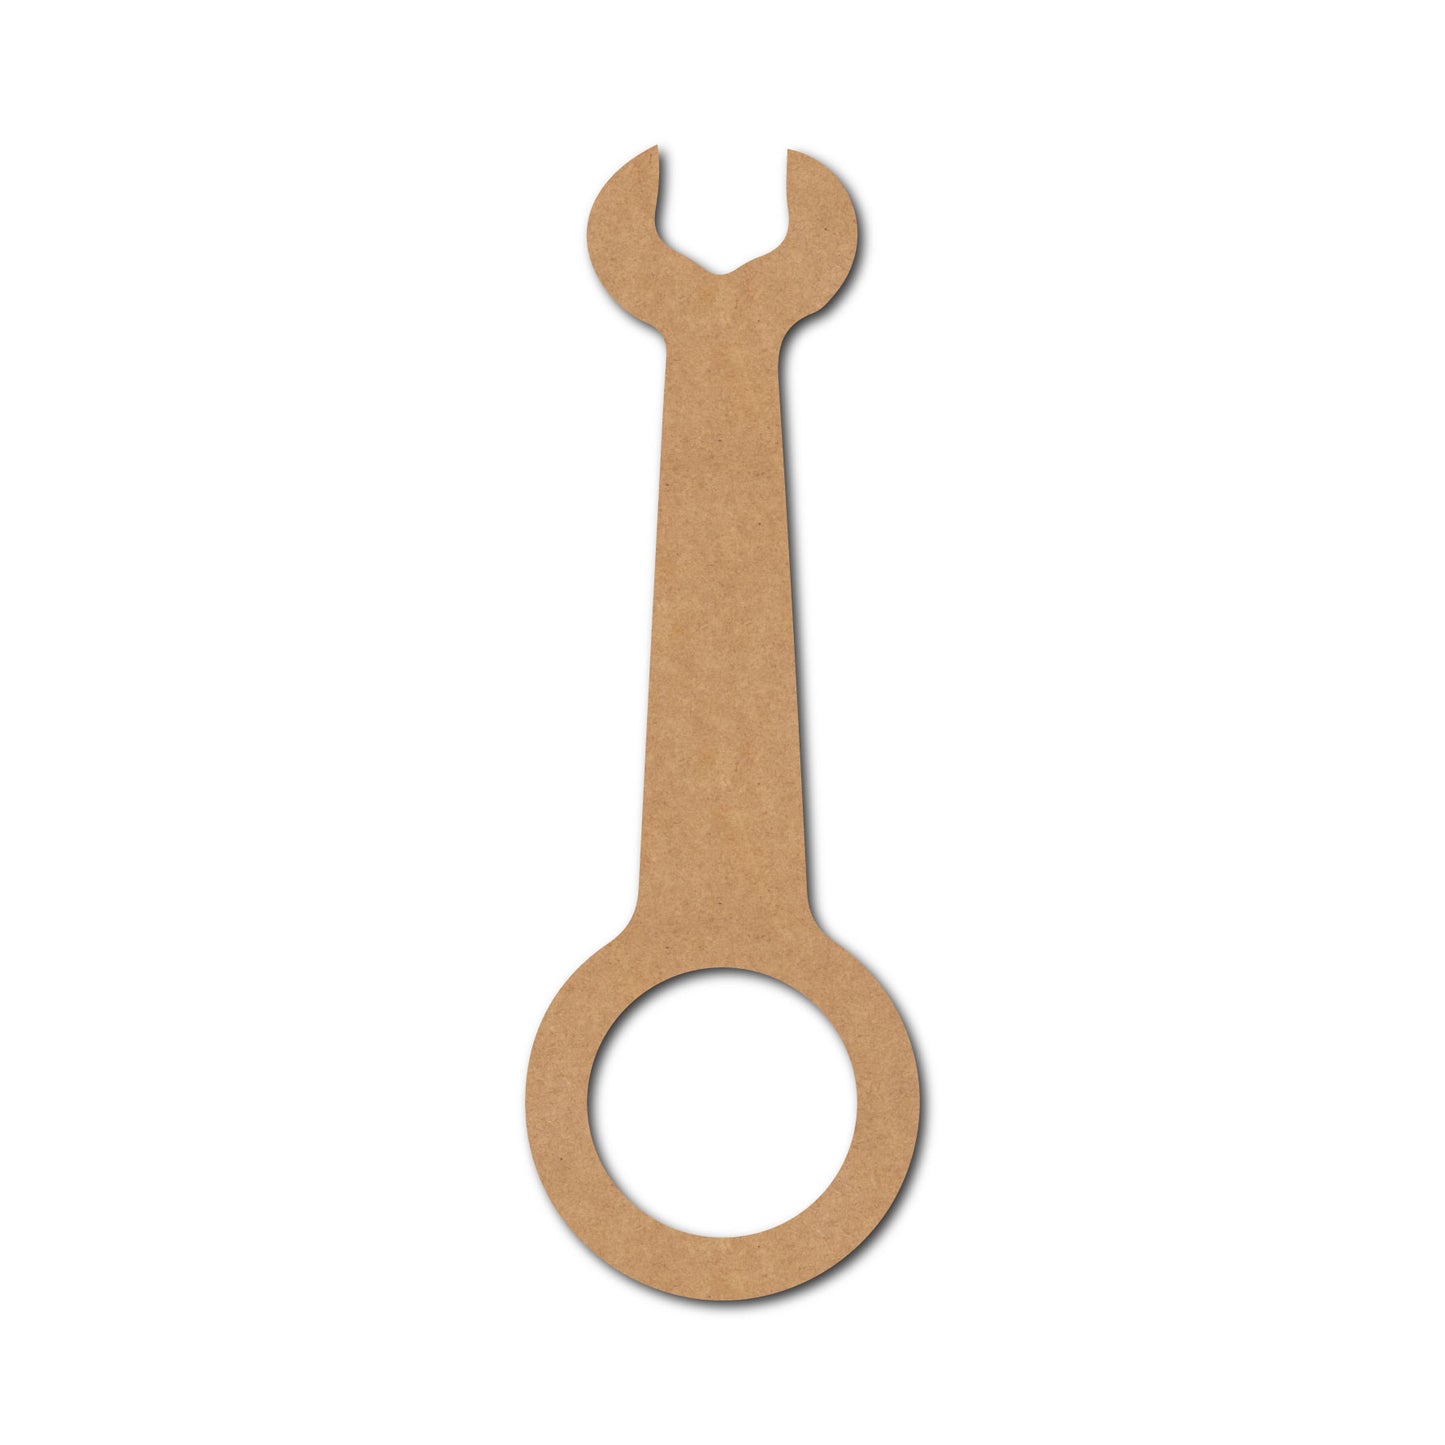 Wrench Tool Cutout MDF Design 4